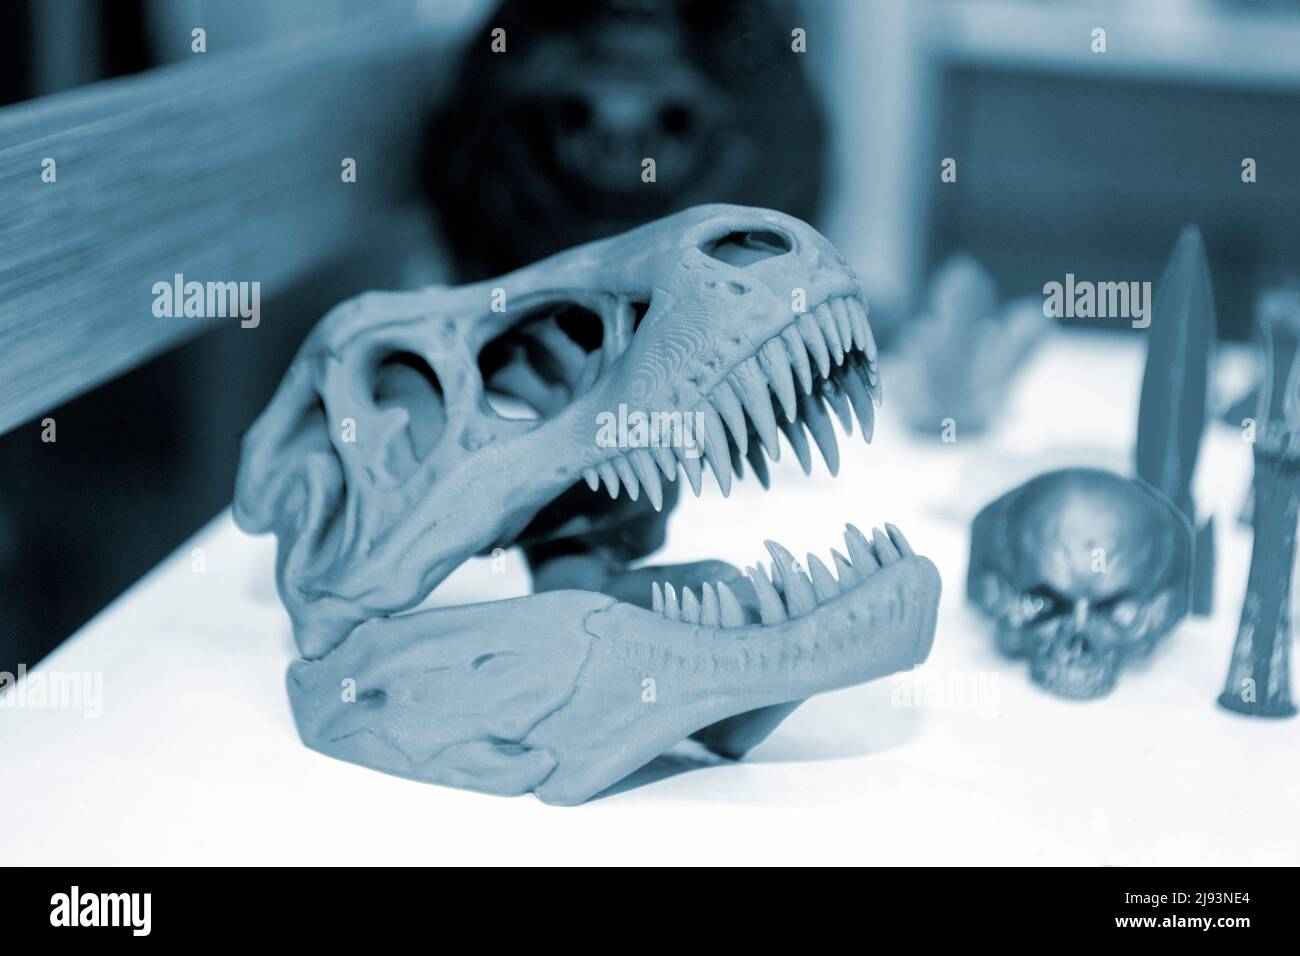 Model dinosaur skull printed on 3d printer. Object photopolymer printed on stereolithography 3D printer. Technology of liquid photopolymerization under UV light. New additive 3D printing technology Stock Photo